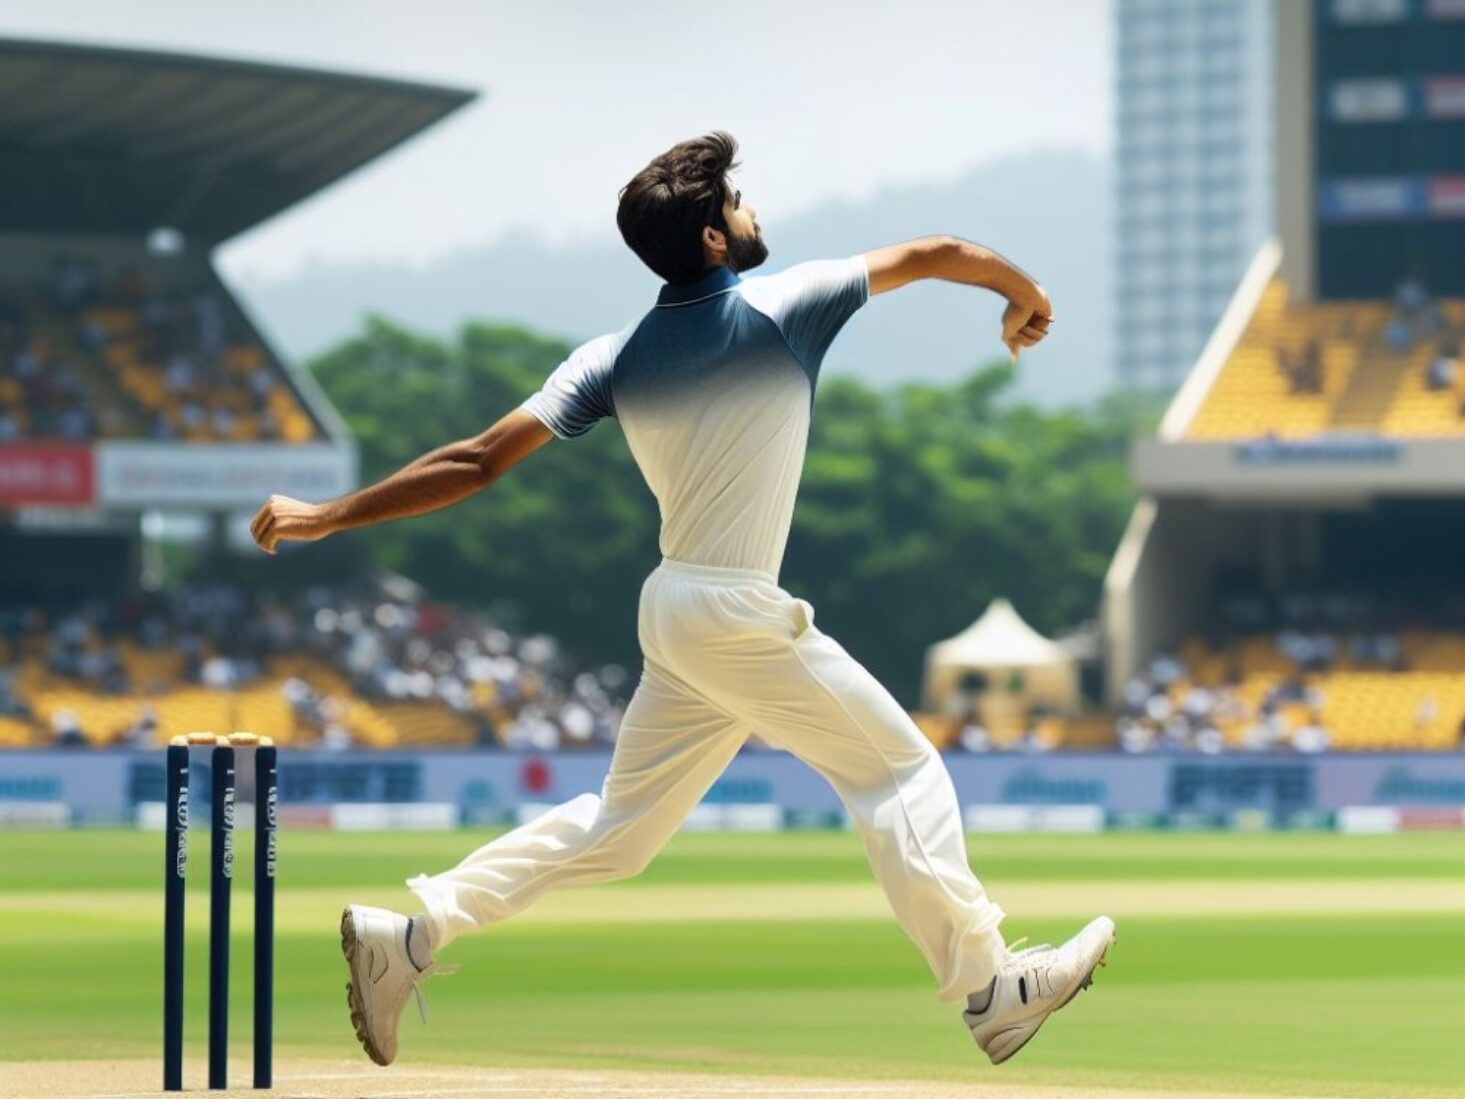 Importance Of The Follow Through in Cricket Bowling